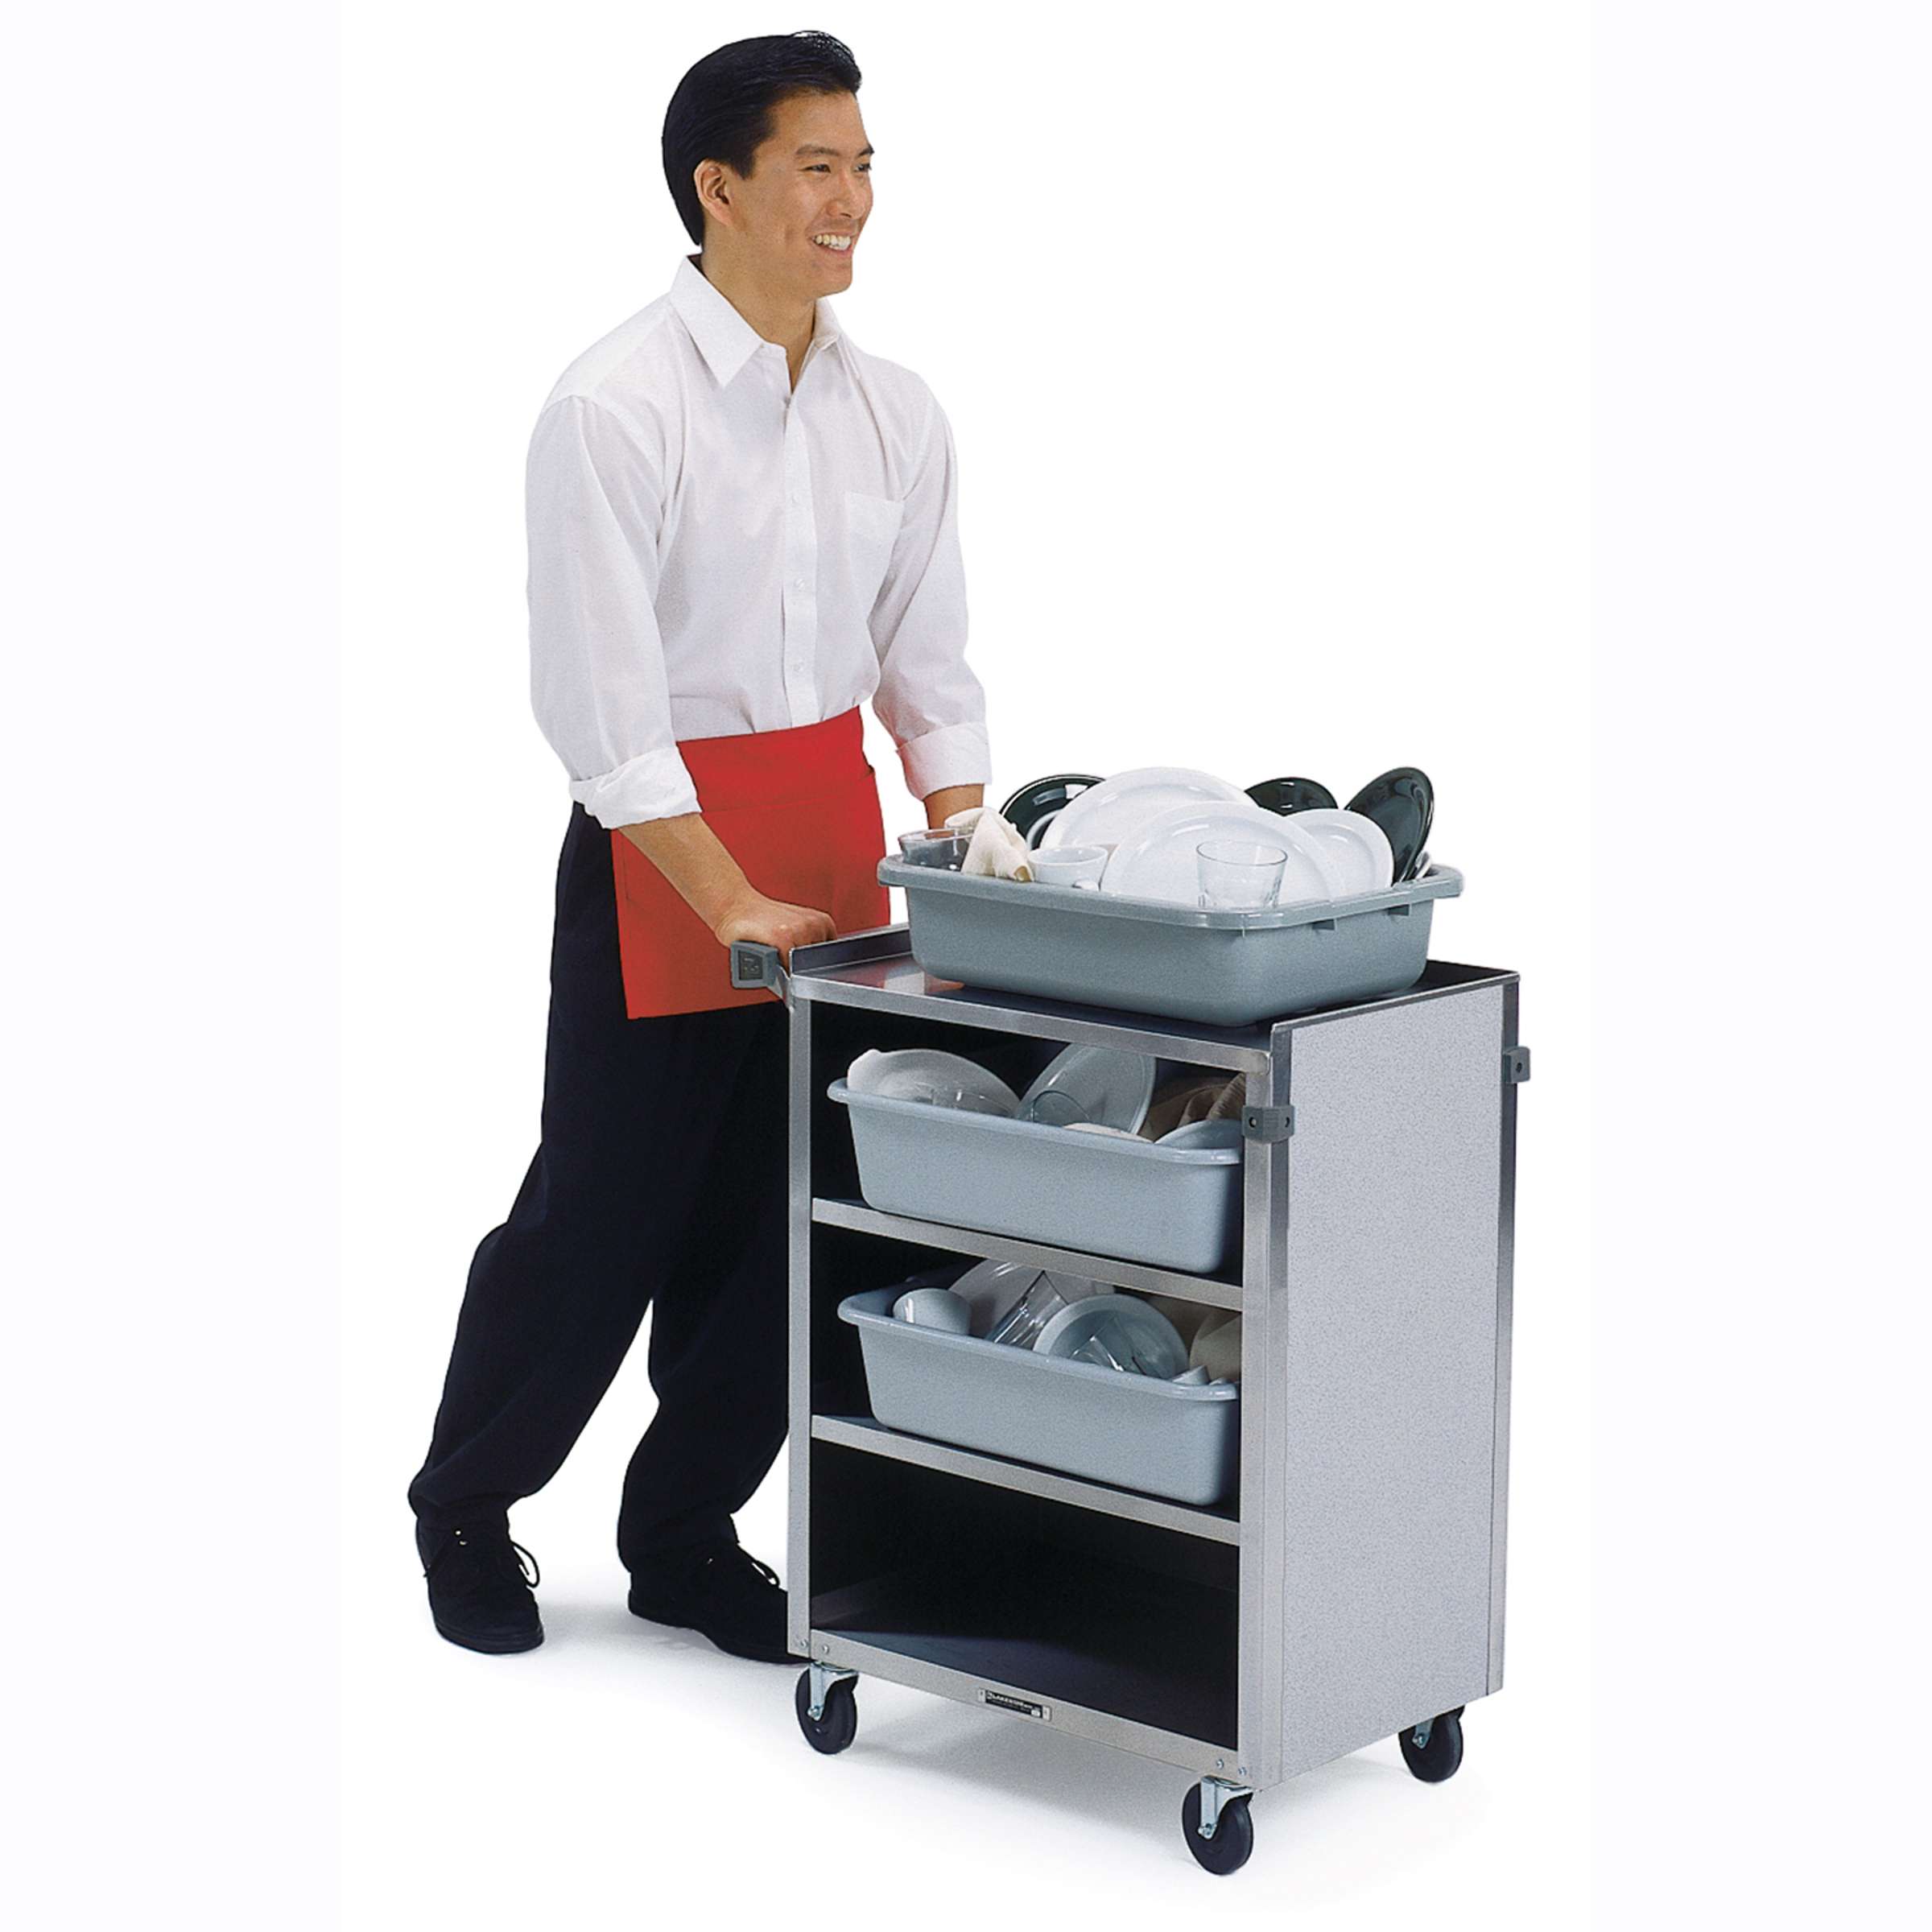 Choice Black Utility / Bussing Cart with Three Shelves - 42 x 20